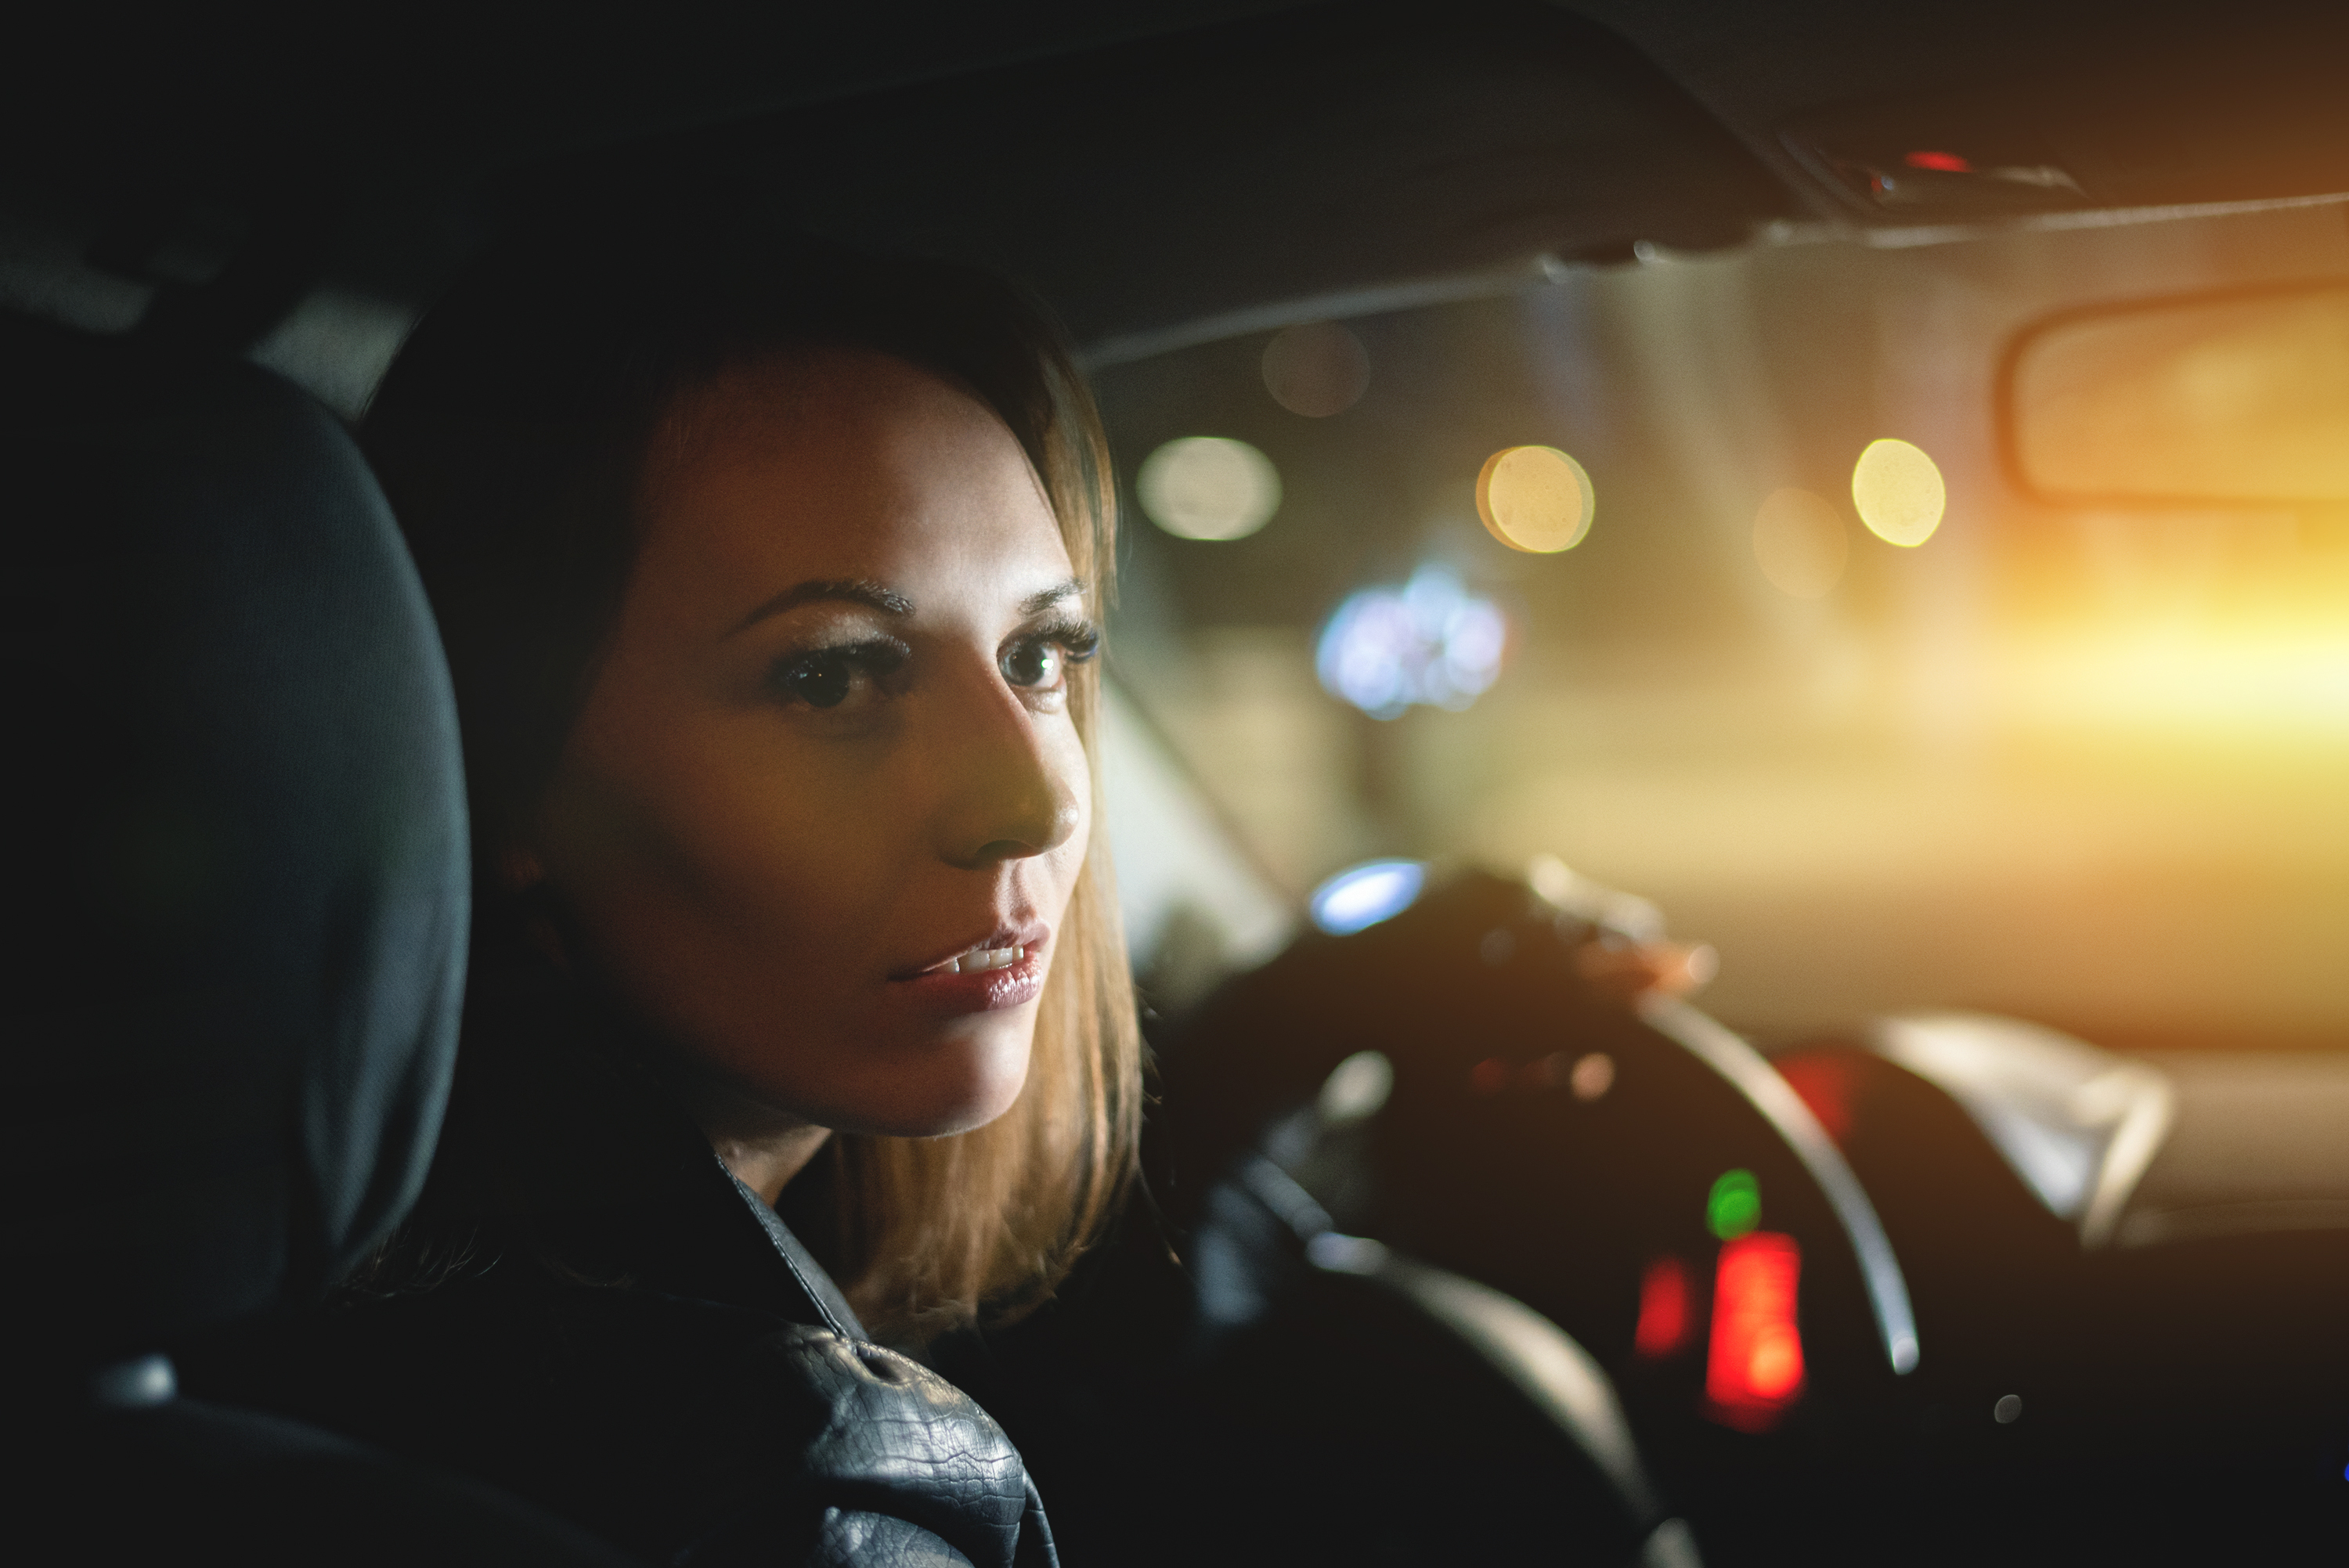 A young woman driver is sitting by steering wheel. | Source: Shutterstock